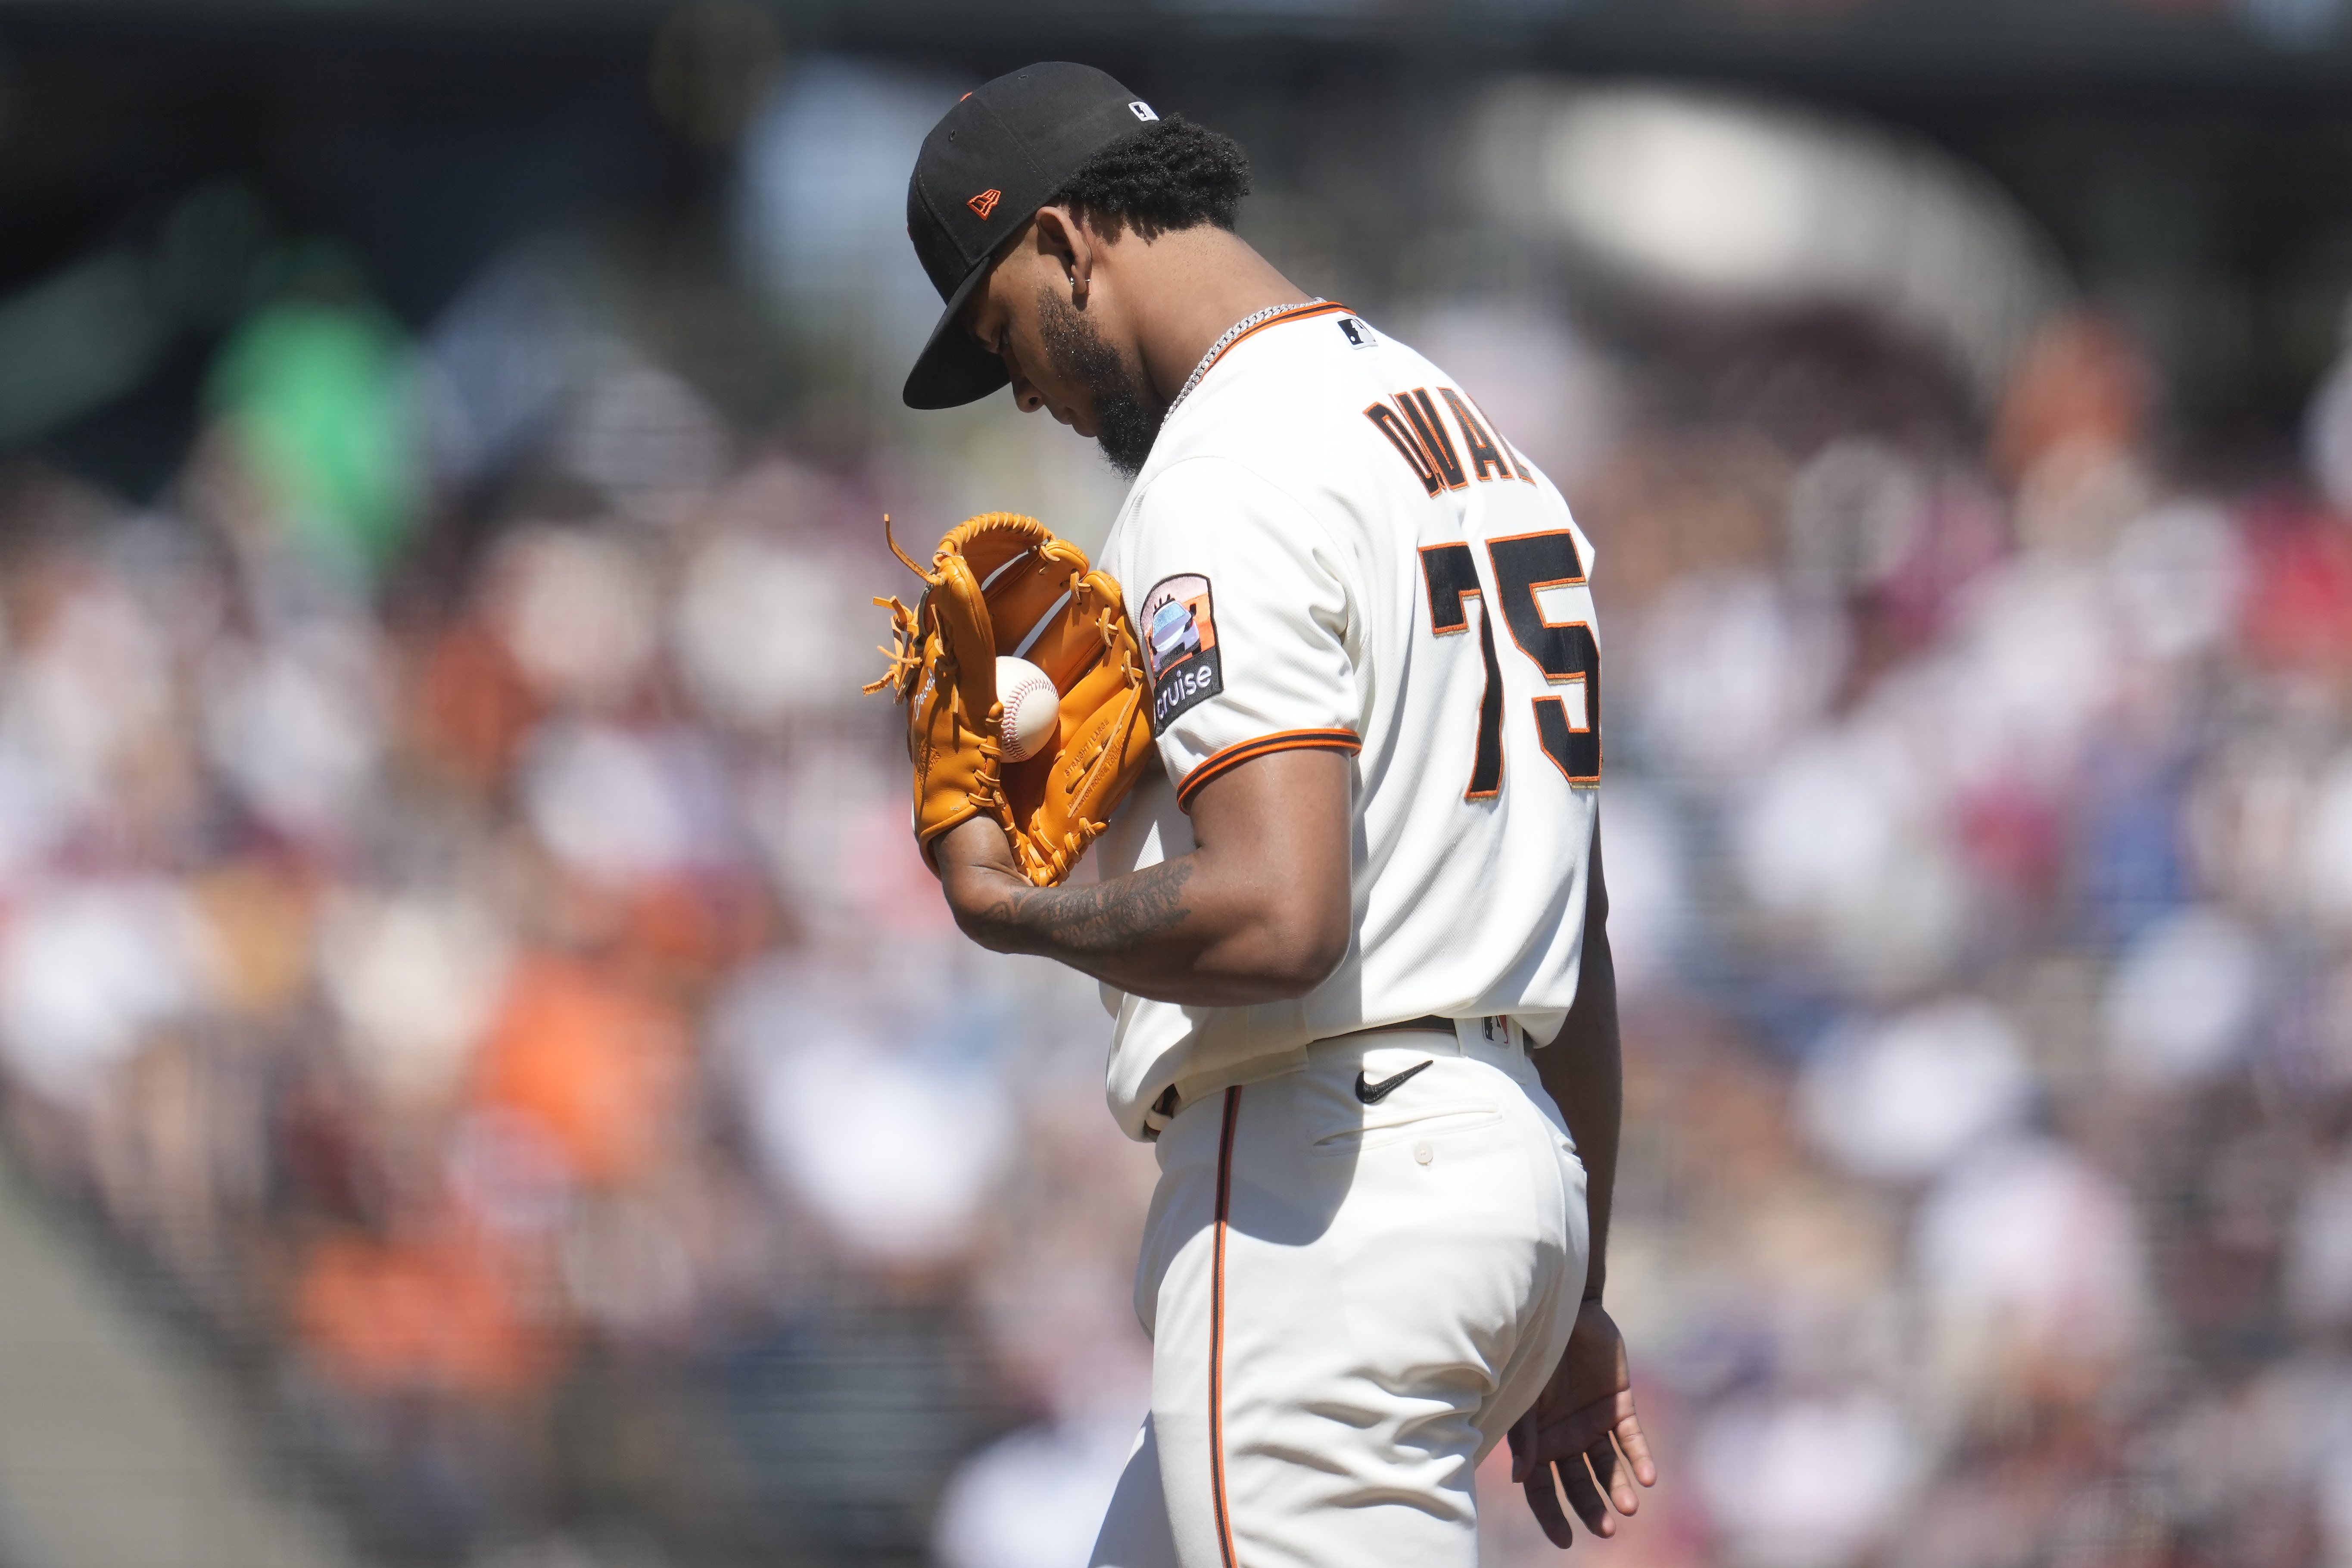 Bailey's 2-run homer in 10th gives Giants 3-2 win over Rangers